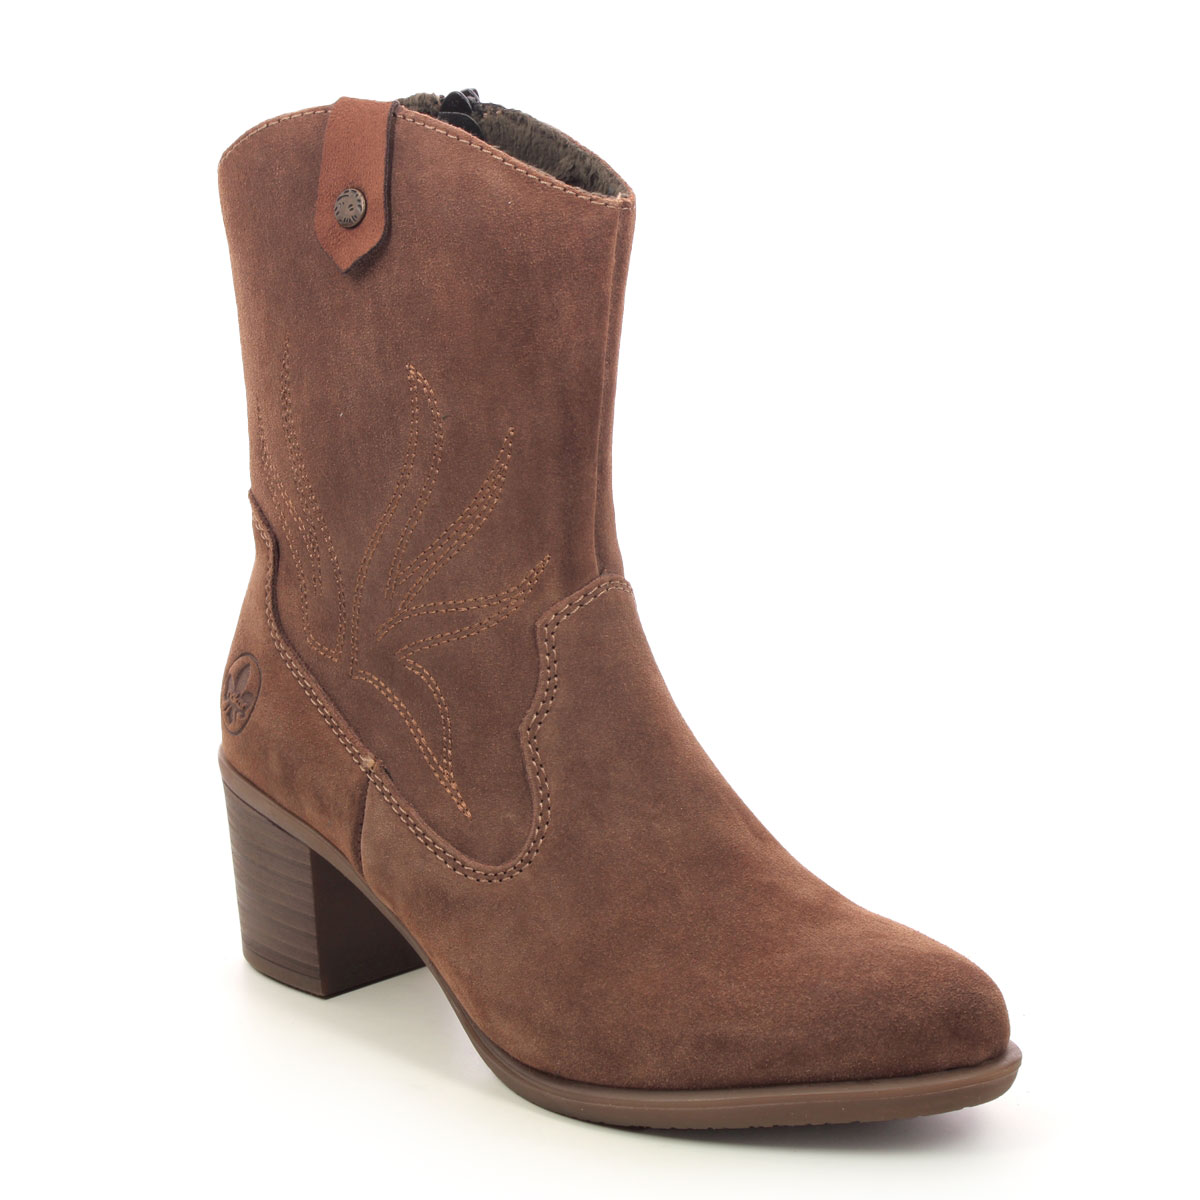 Rieker Saddle West Tan Suede Womens Ankle Boots Y2057-20 In Size 40 In Plain Tan Suede